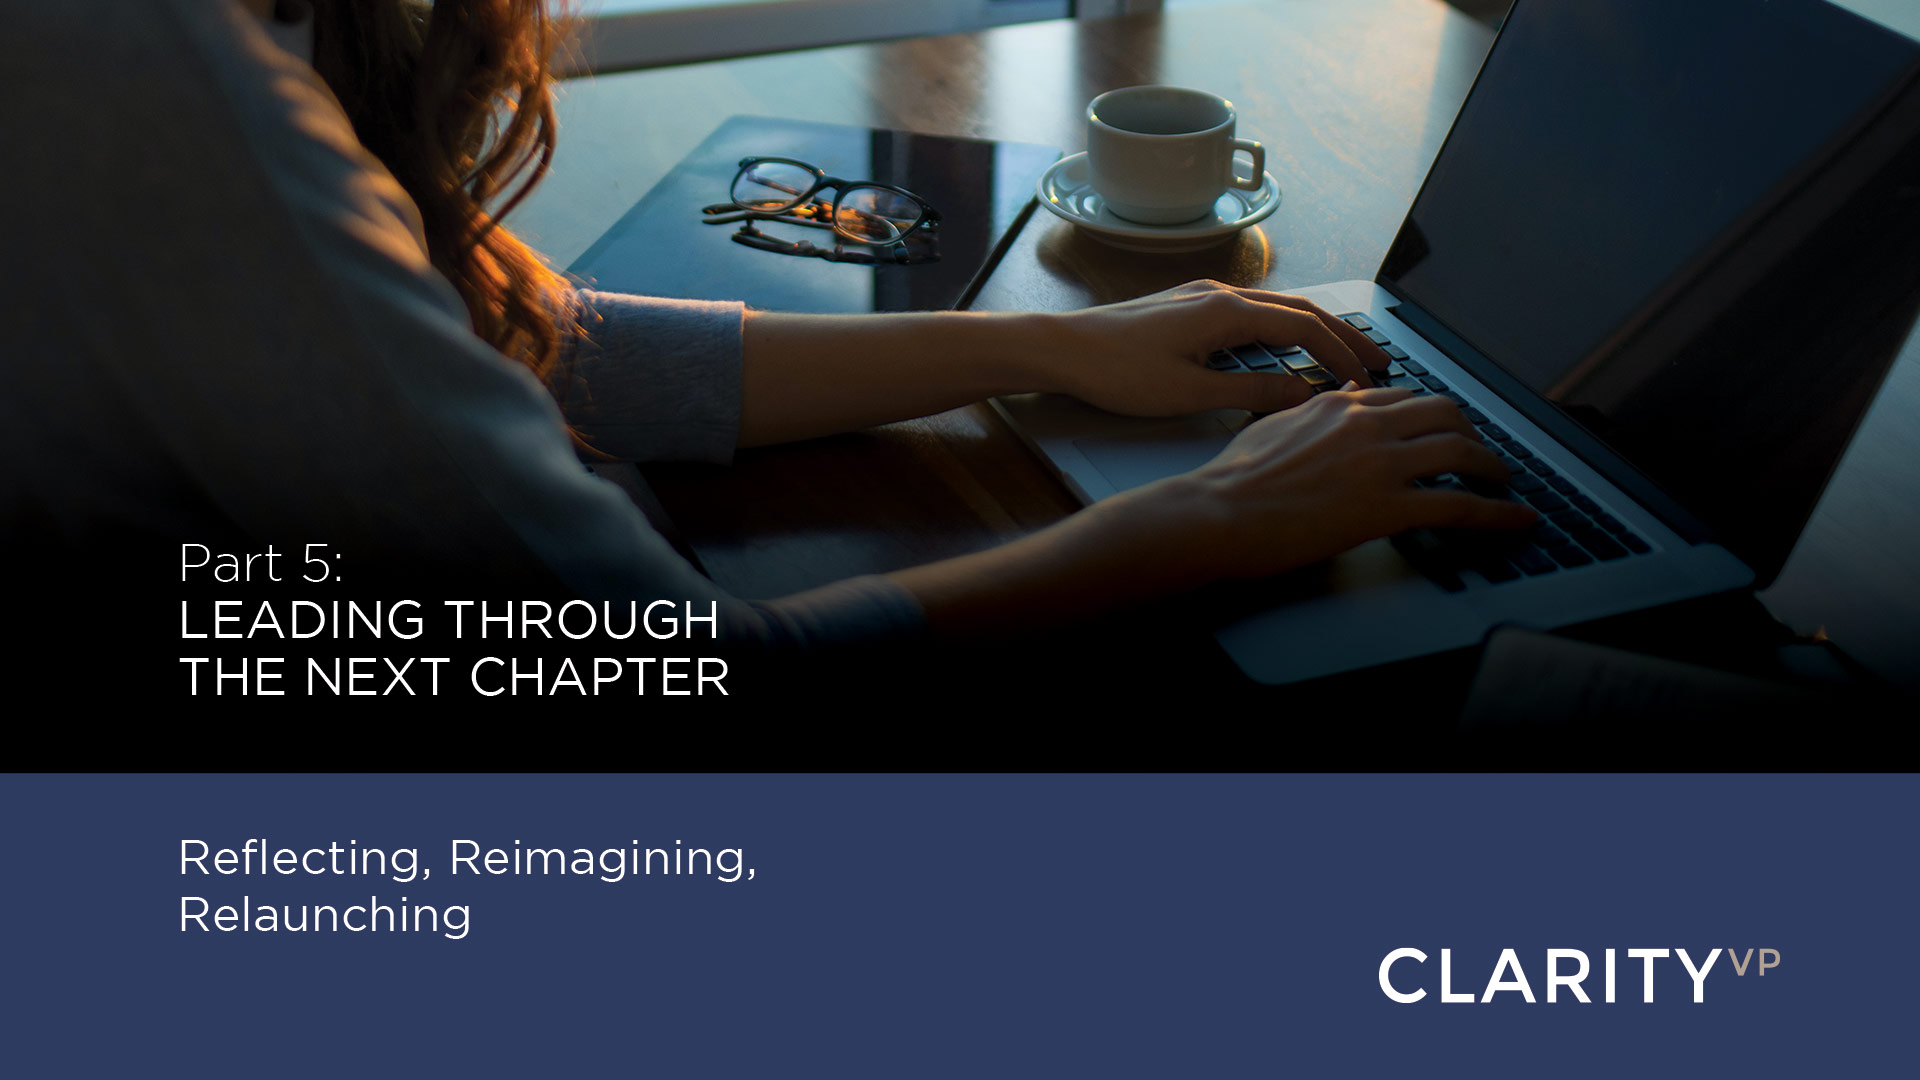 Part 5: Leading Through the Next Chapter – Reflecting, Reimagining, Relaunching